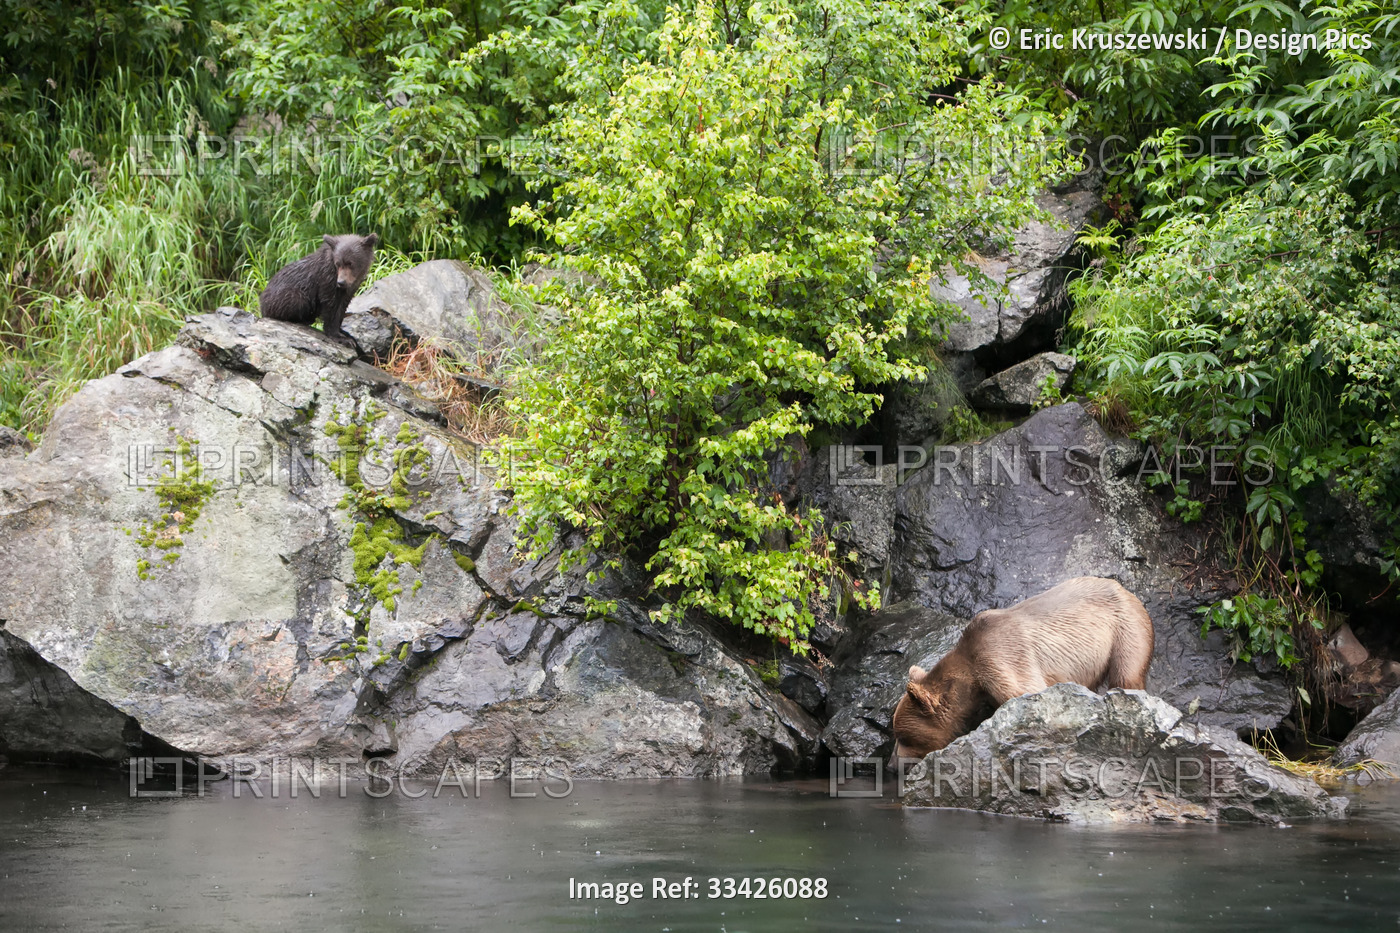 An Alaskan brown grizzly bear and its cub stand on rocks near the water's edge ...